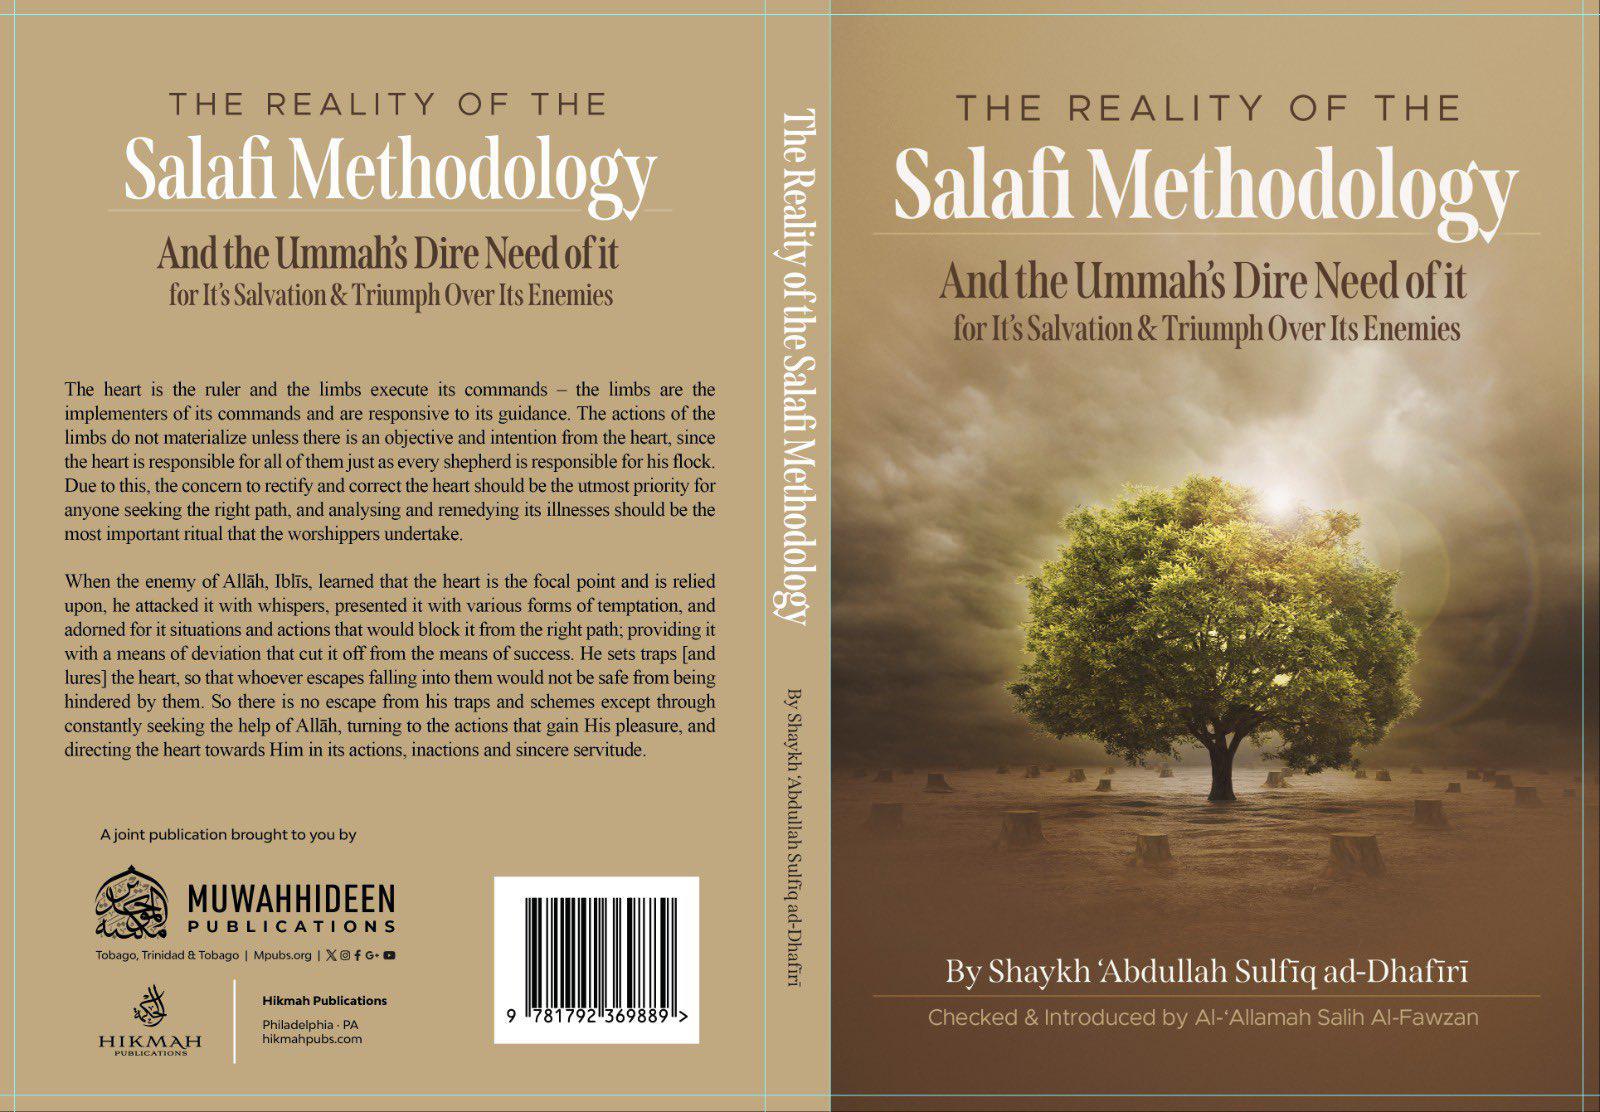 The Reality Of The Salafi Methodology And The Ummah's Dire Need Of It For It's Salvation & Triumph Over Its Enemies